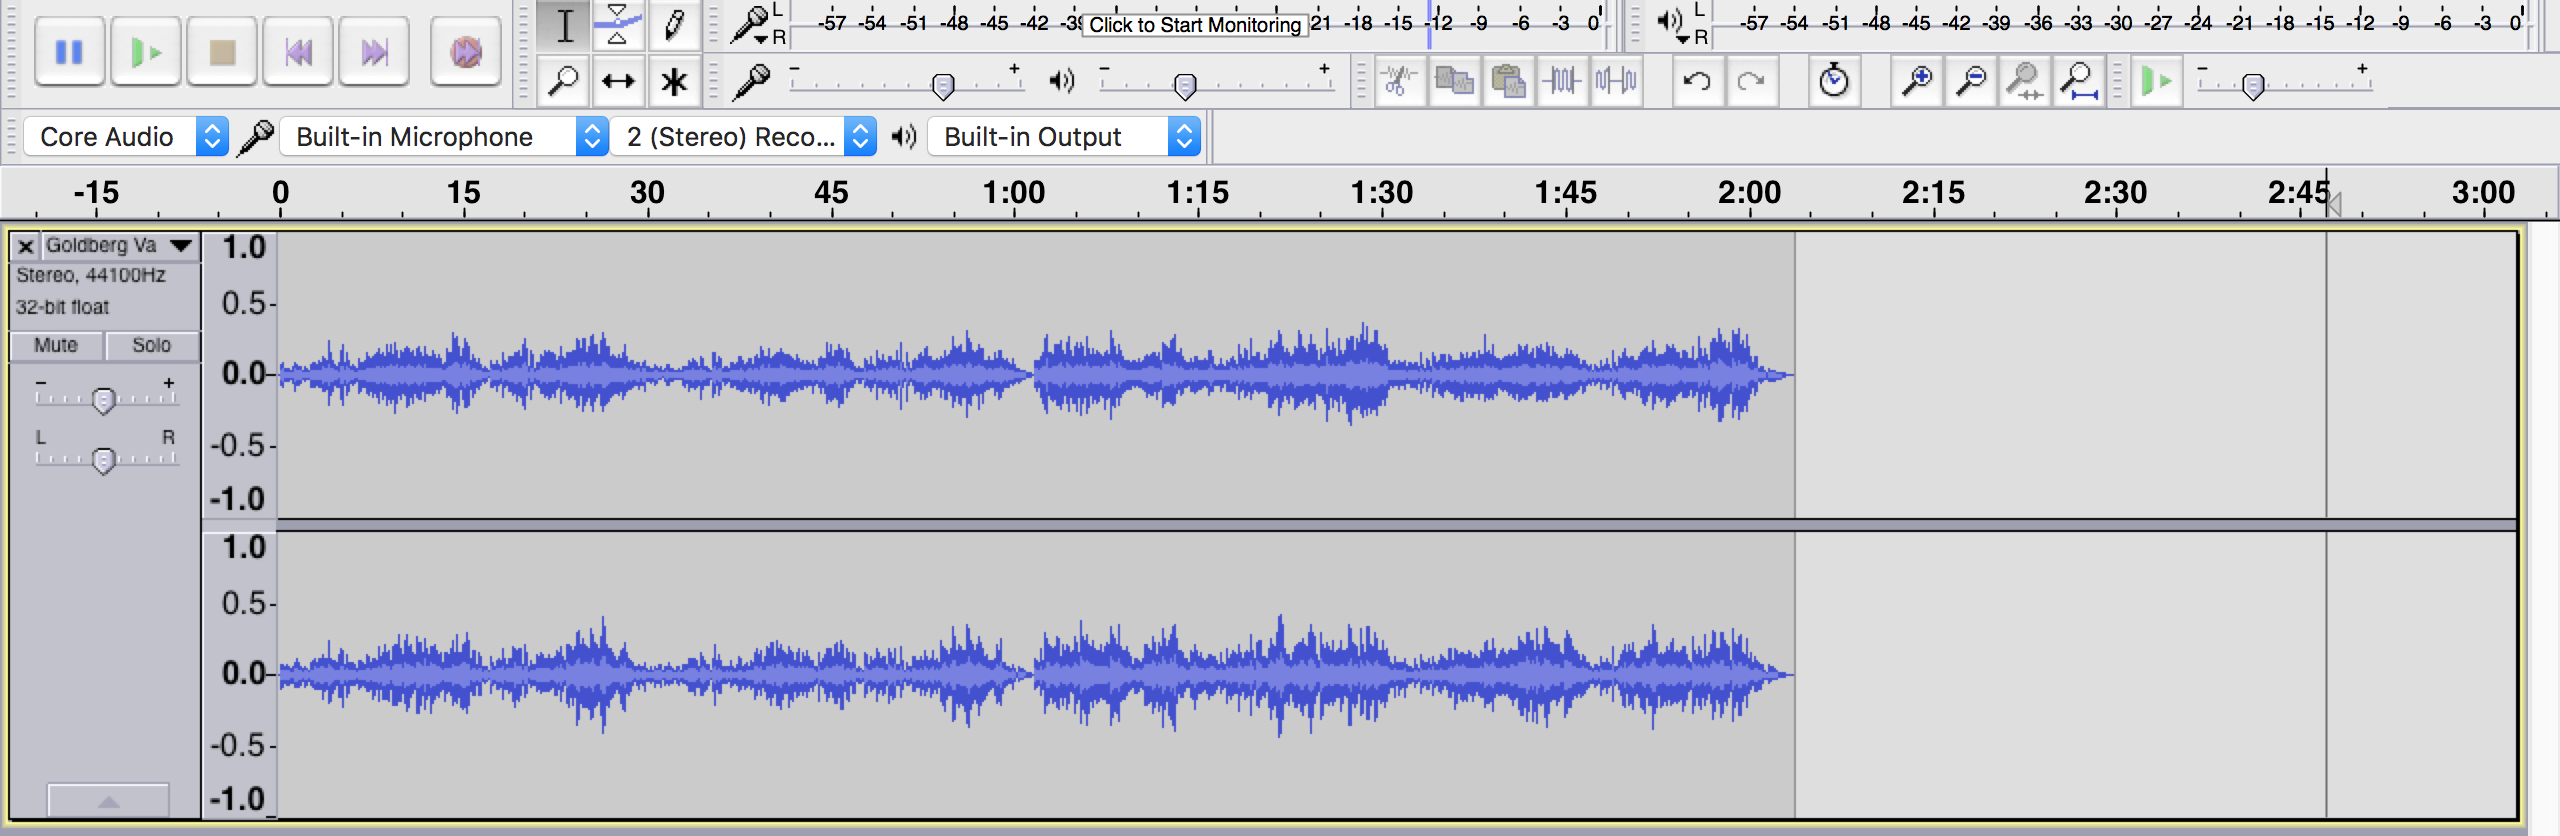 Bach waveform in Audacity